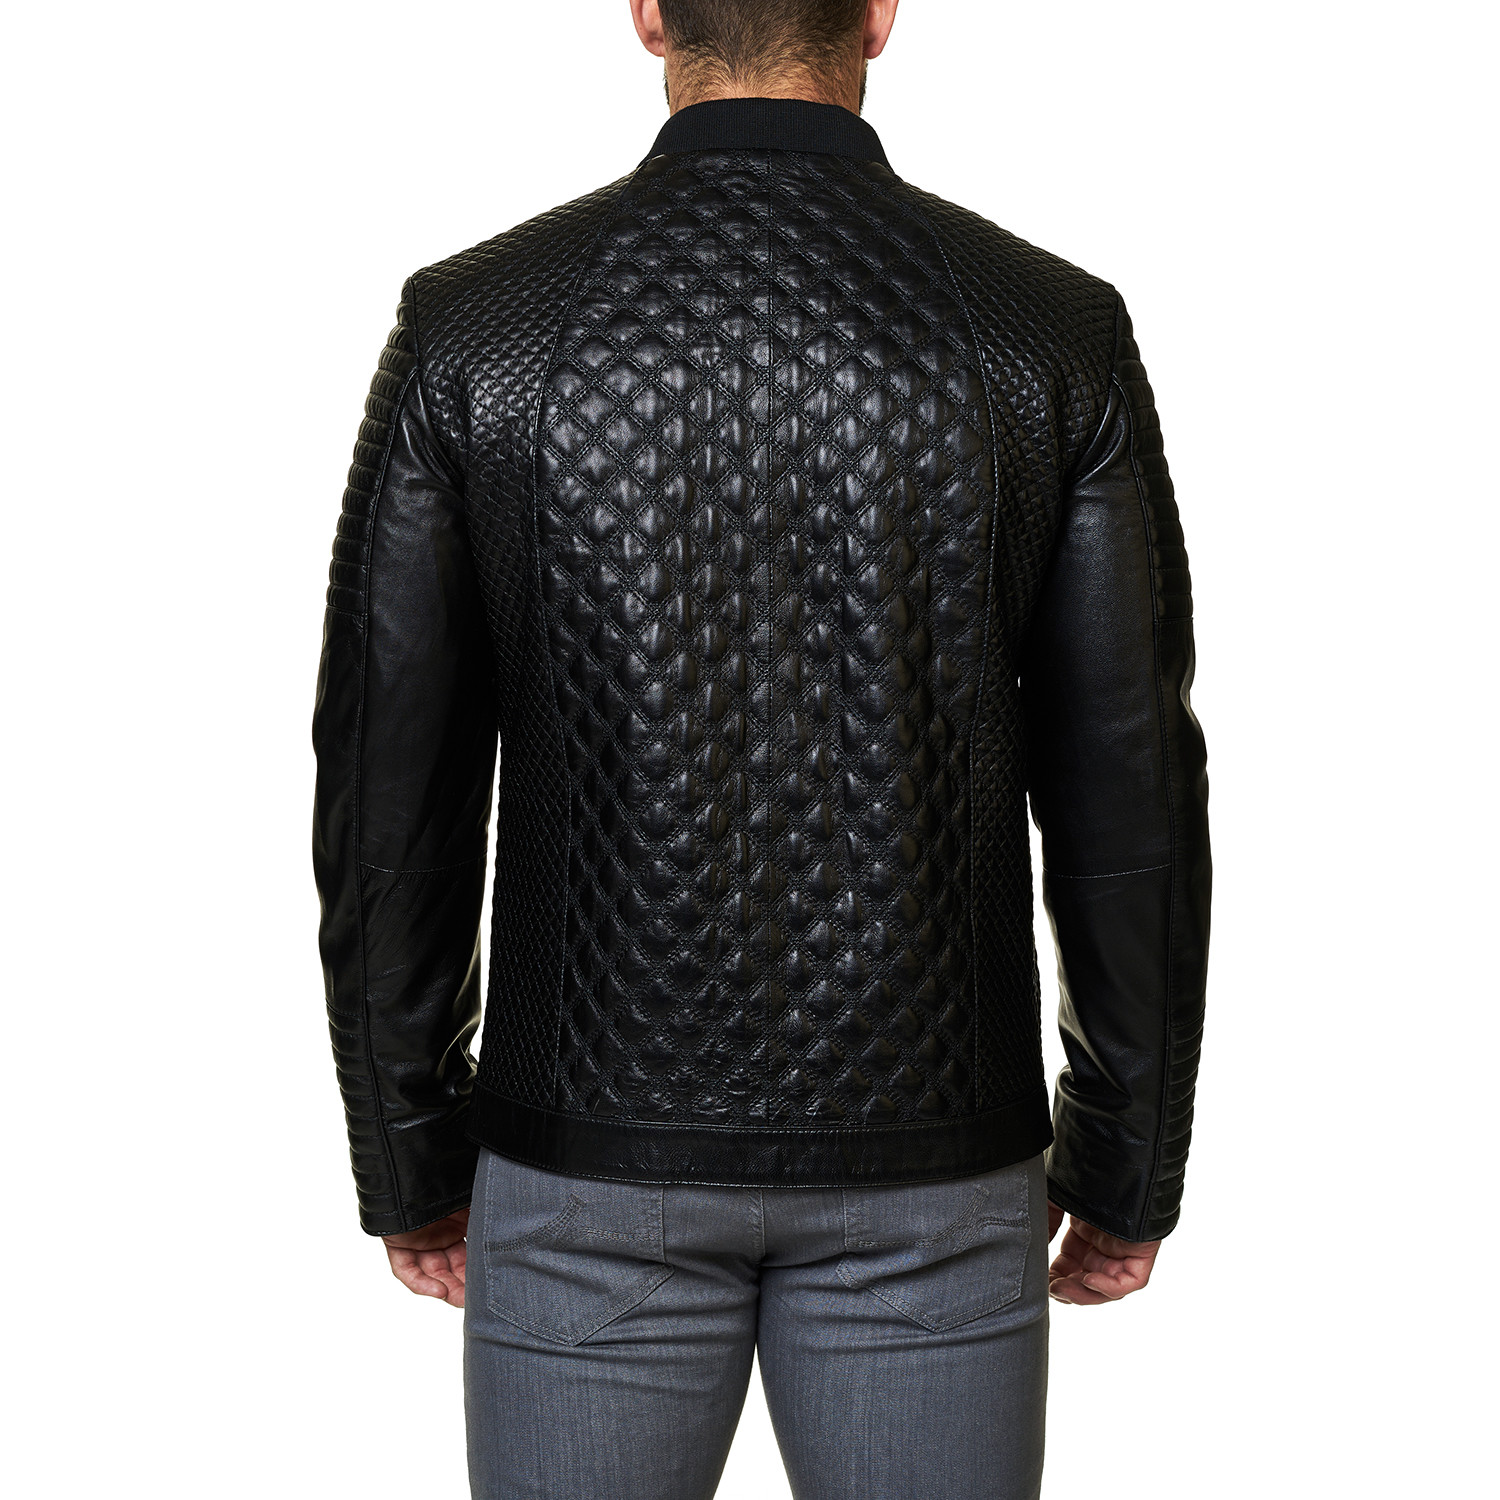 Croco Bomber Jacket // Black (S) - Maceoo - Touch of Modern